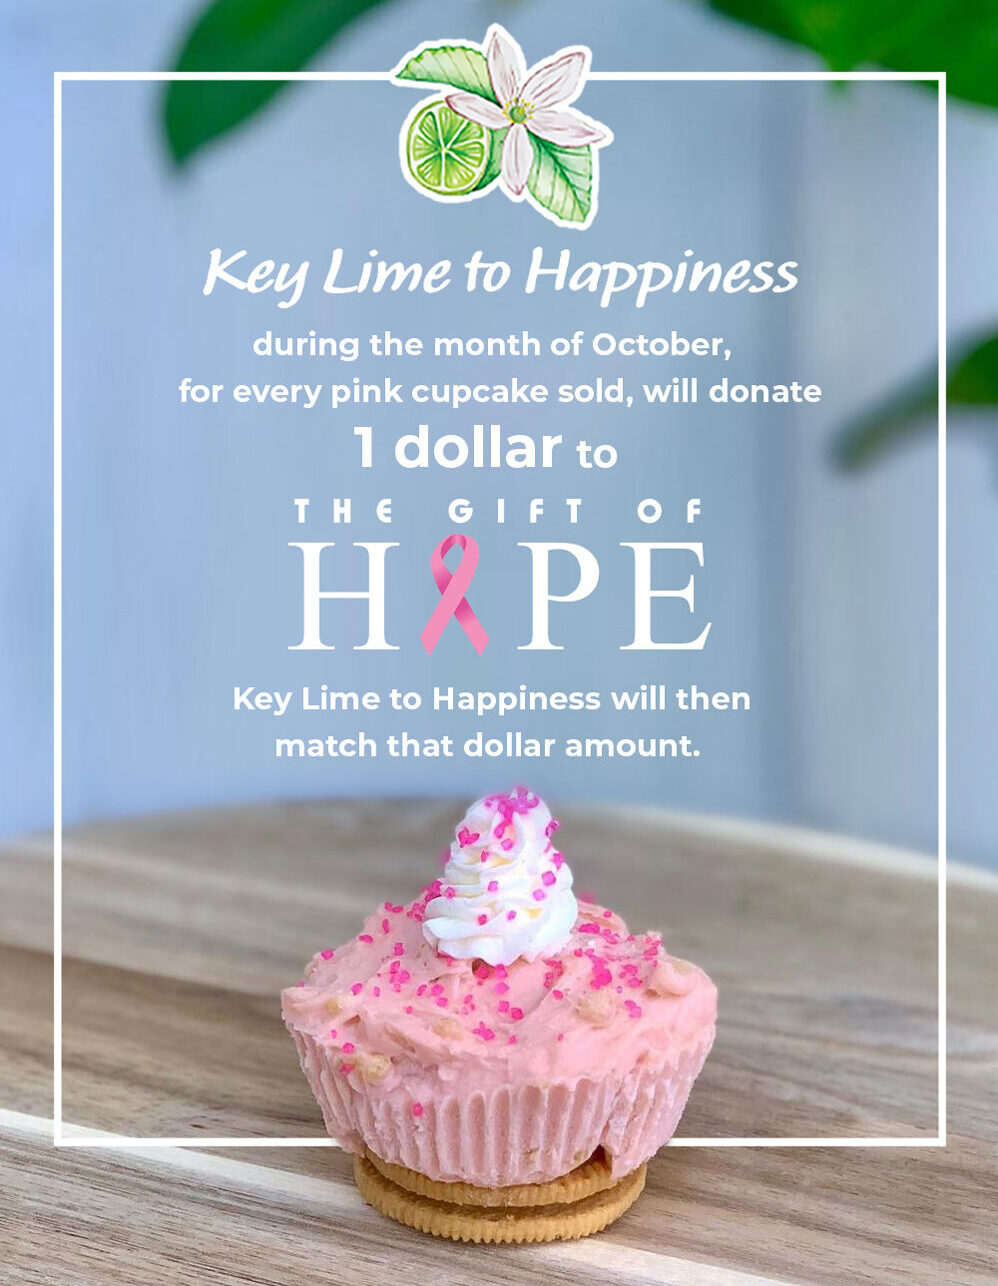 Key Lime to Happiness - Fundraiser for the Gift of Hope